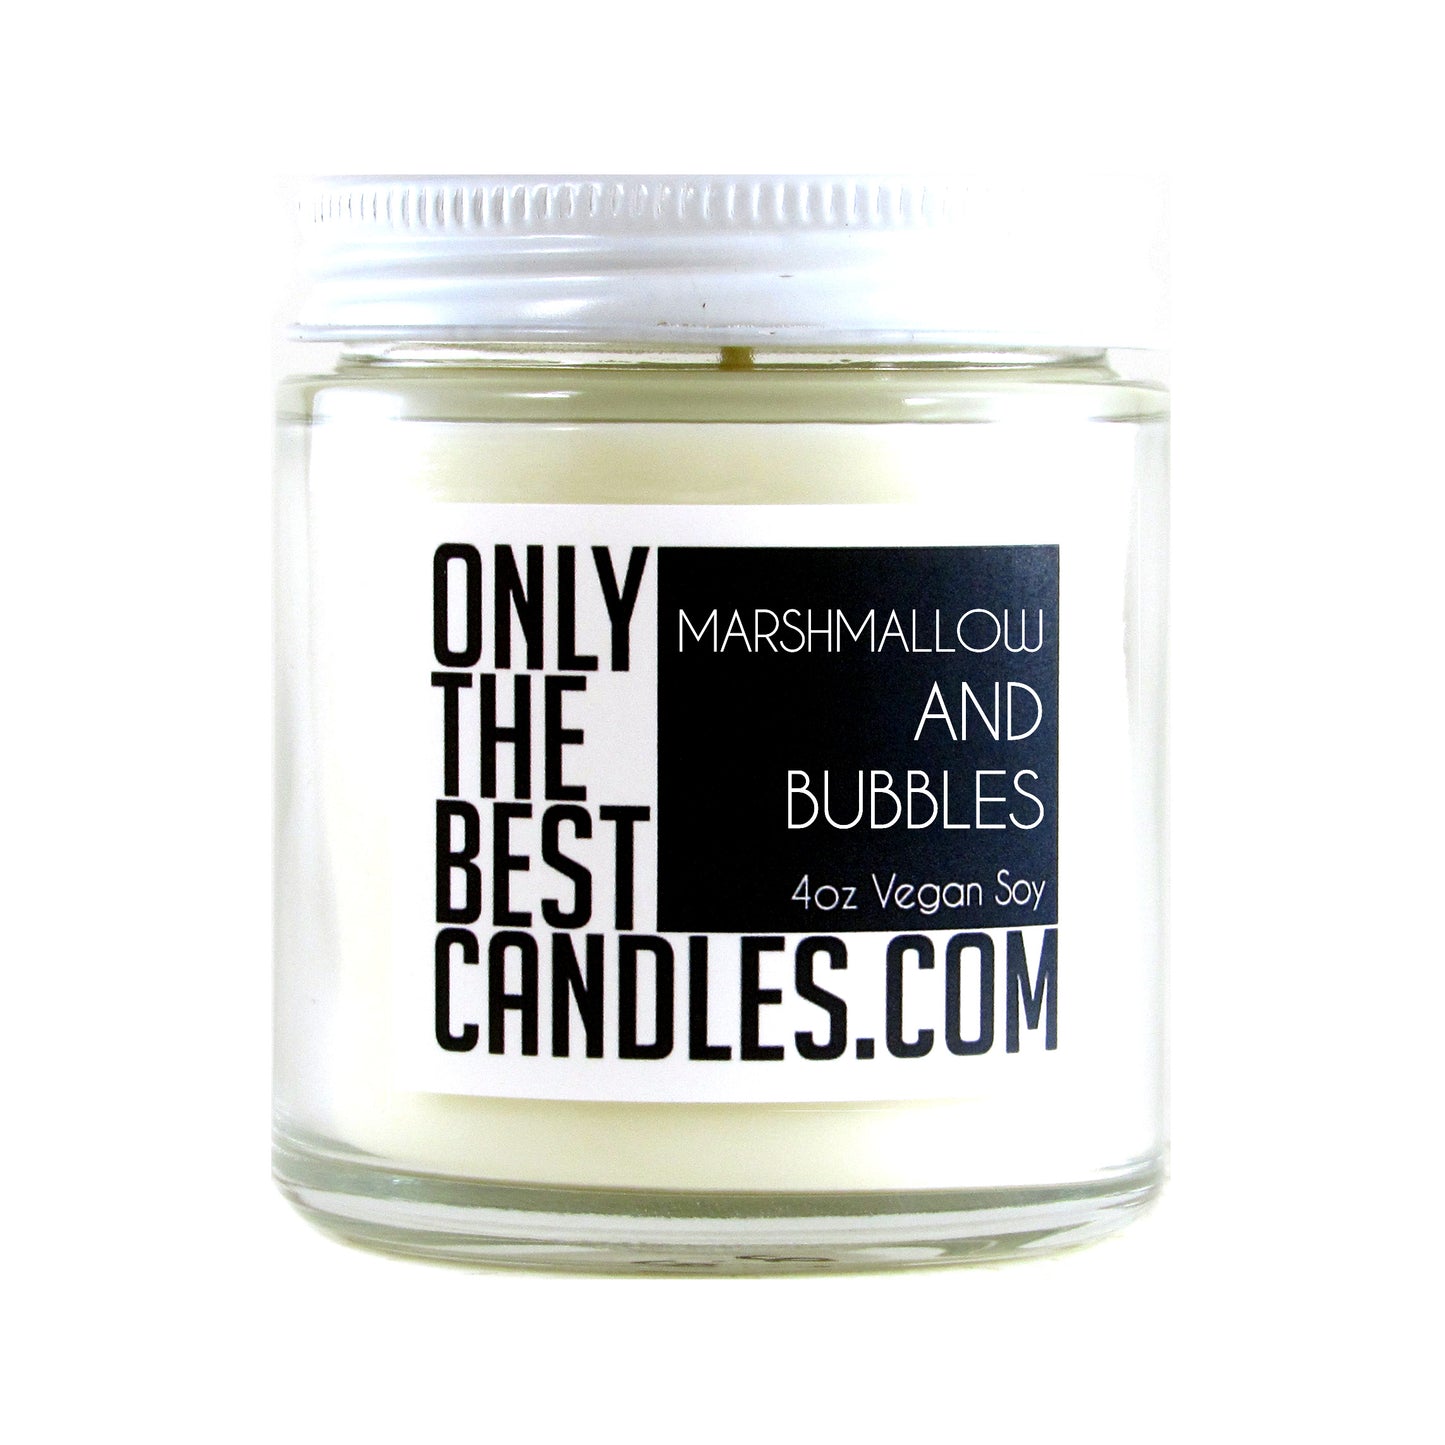 Marshmallow and Bubbles 4oz Candle